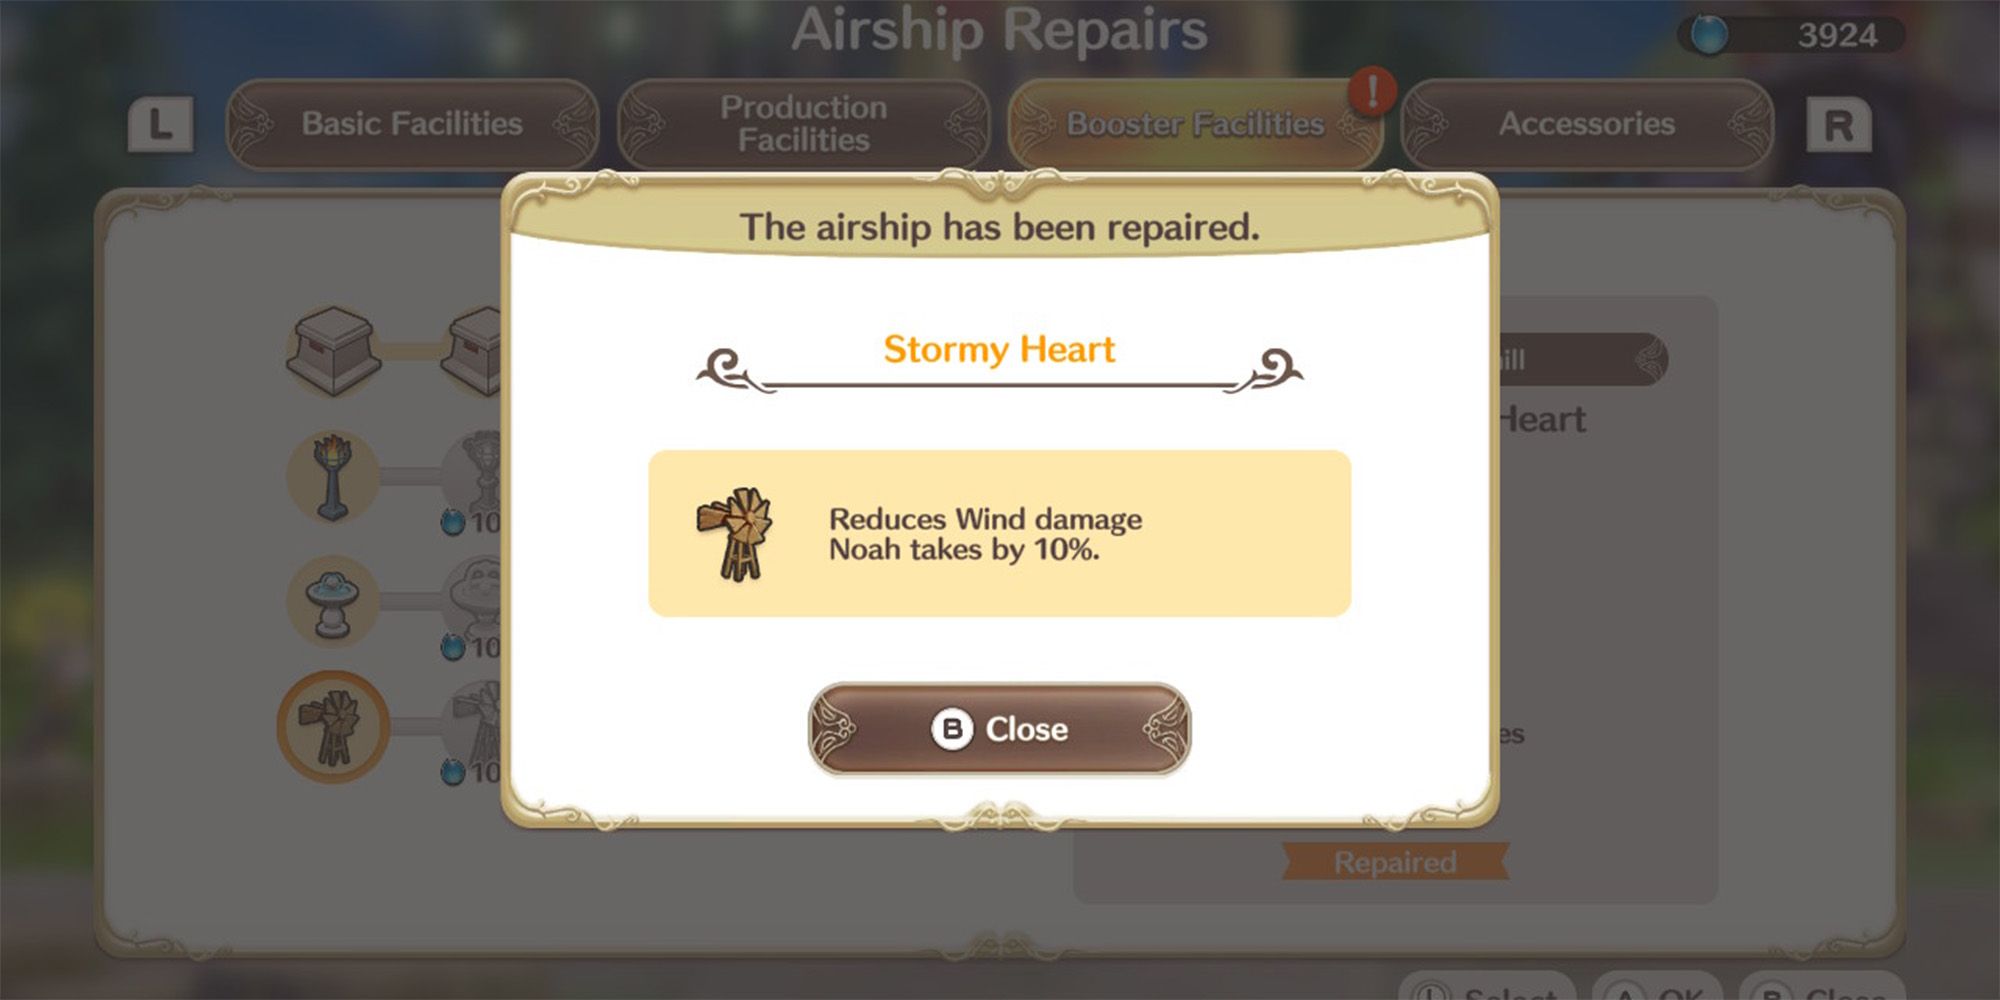 acquiring the stormy heart upgrade for the airship, reducing damage from wind attacks